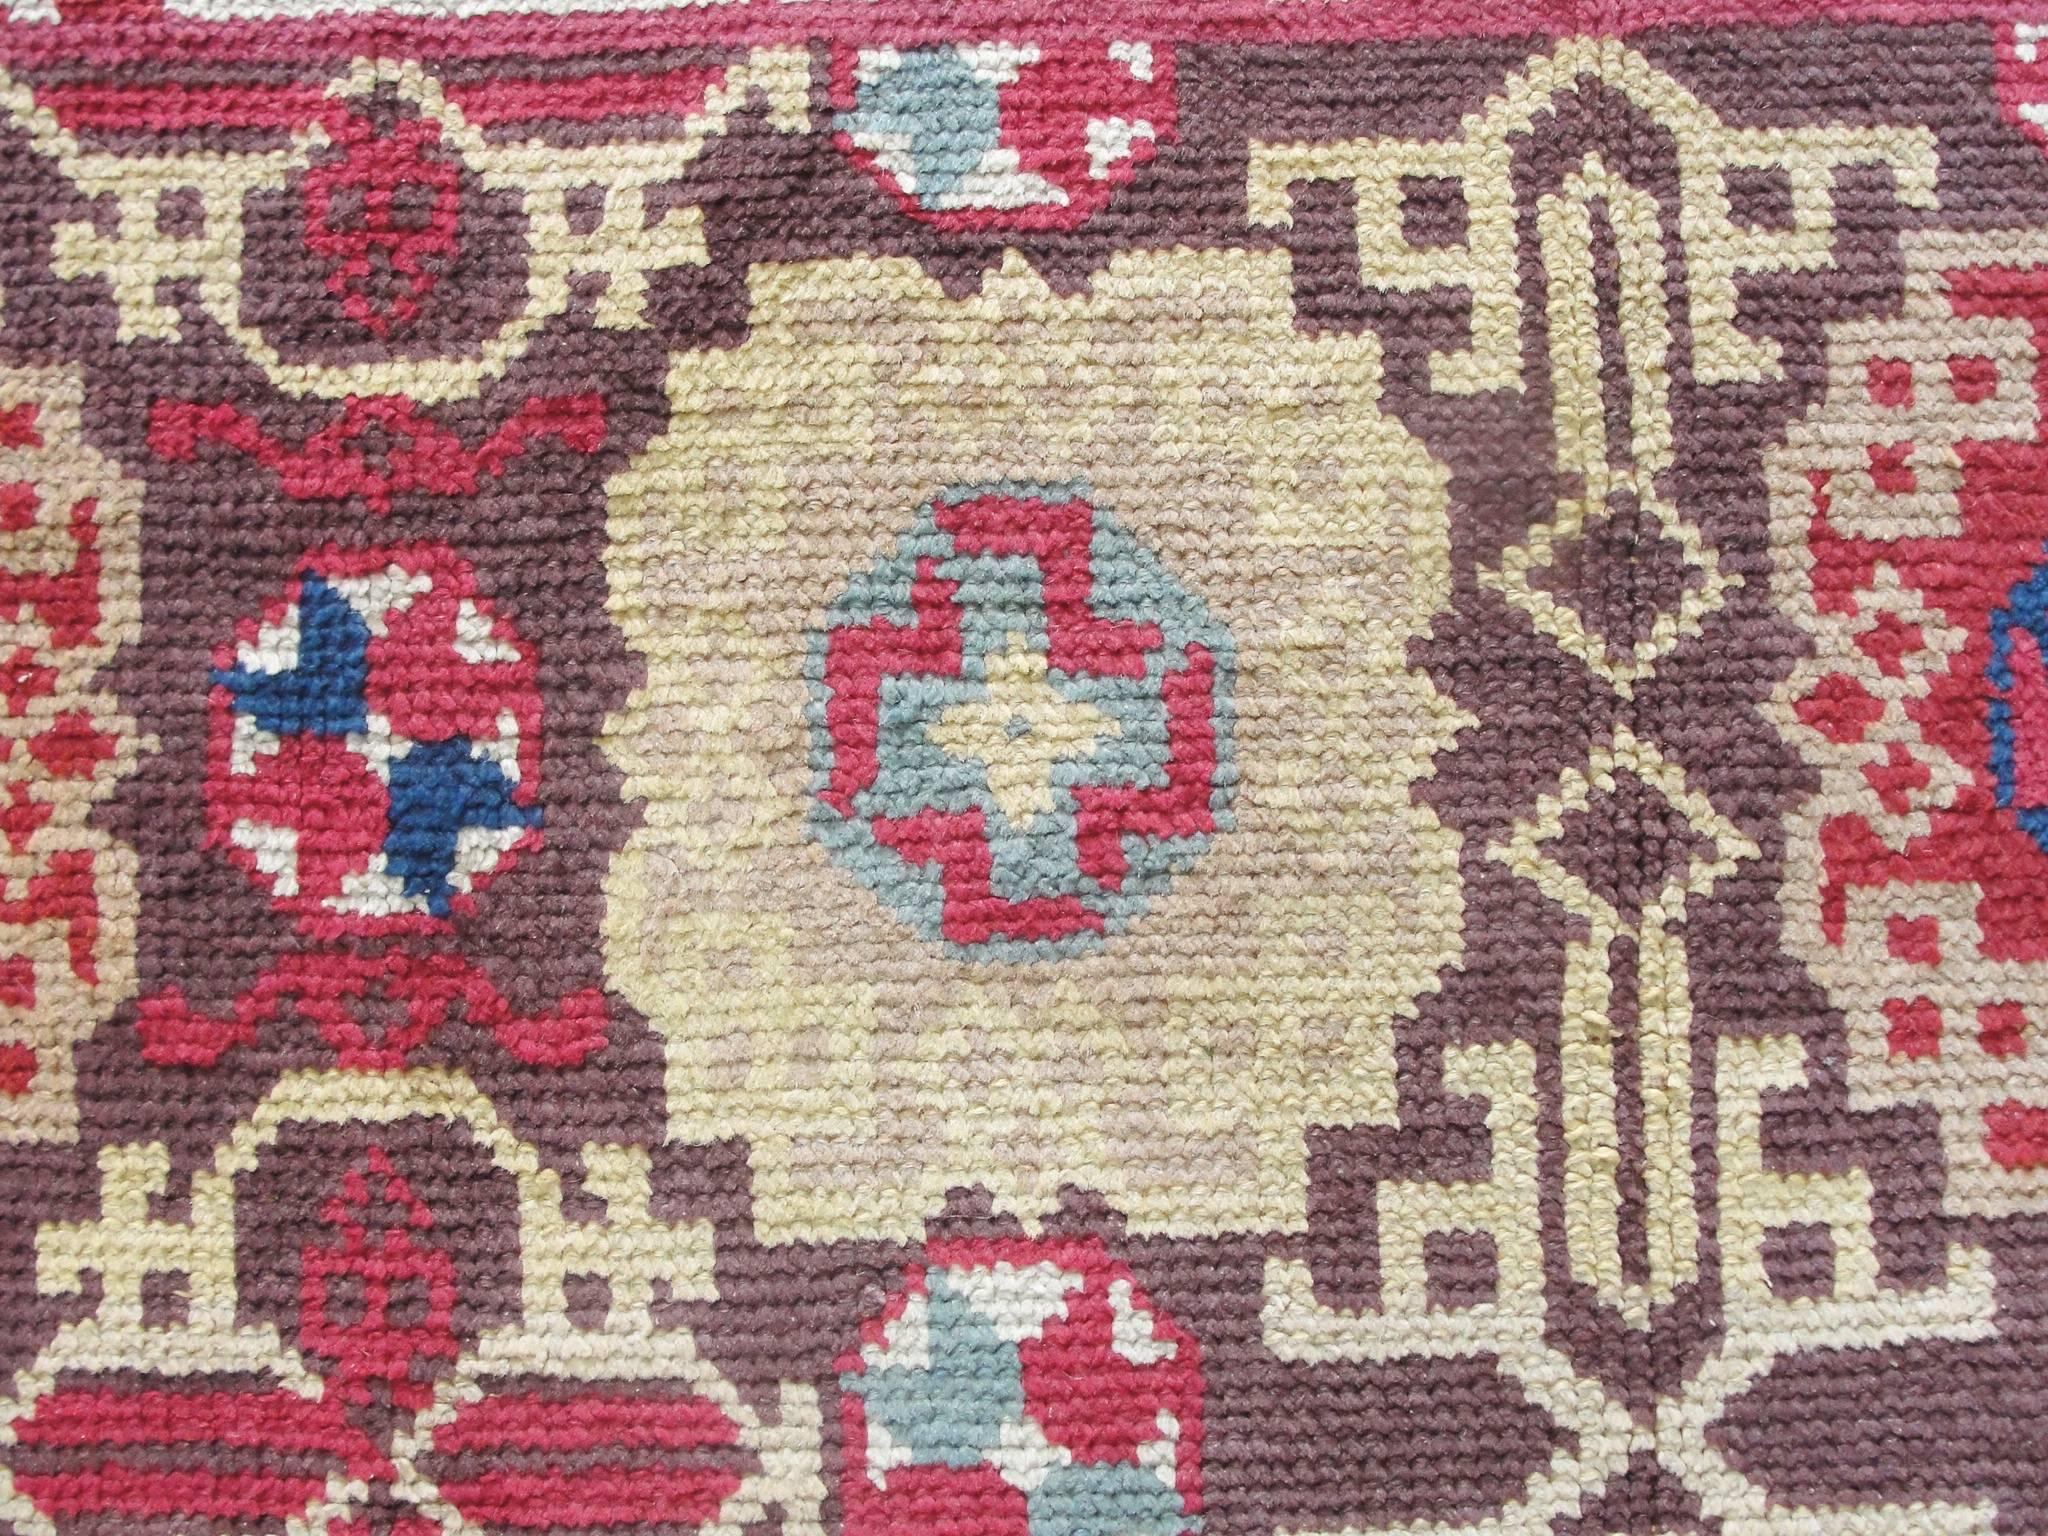 Hand-Woven Antique Savoriness English Carpet, 8' x 11' For Sale